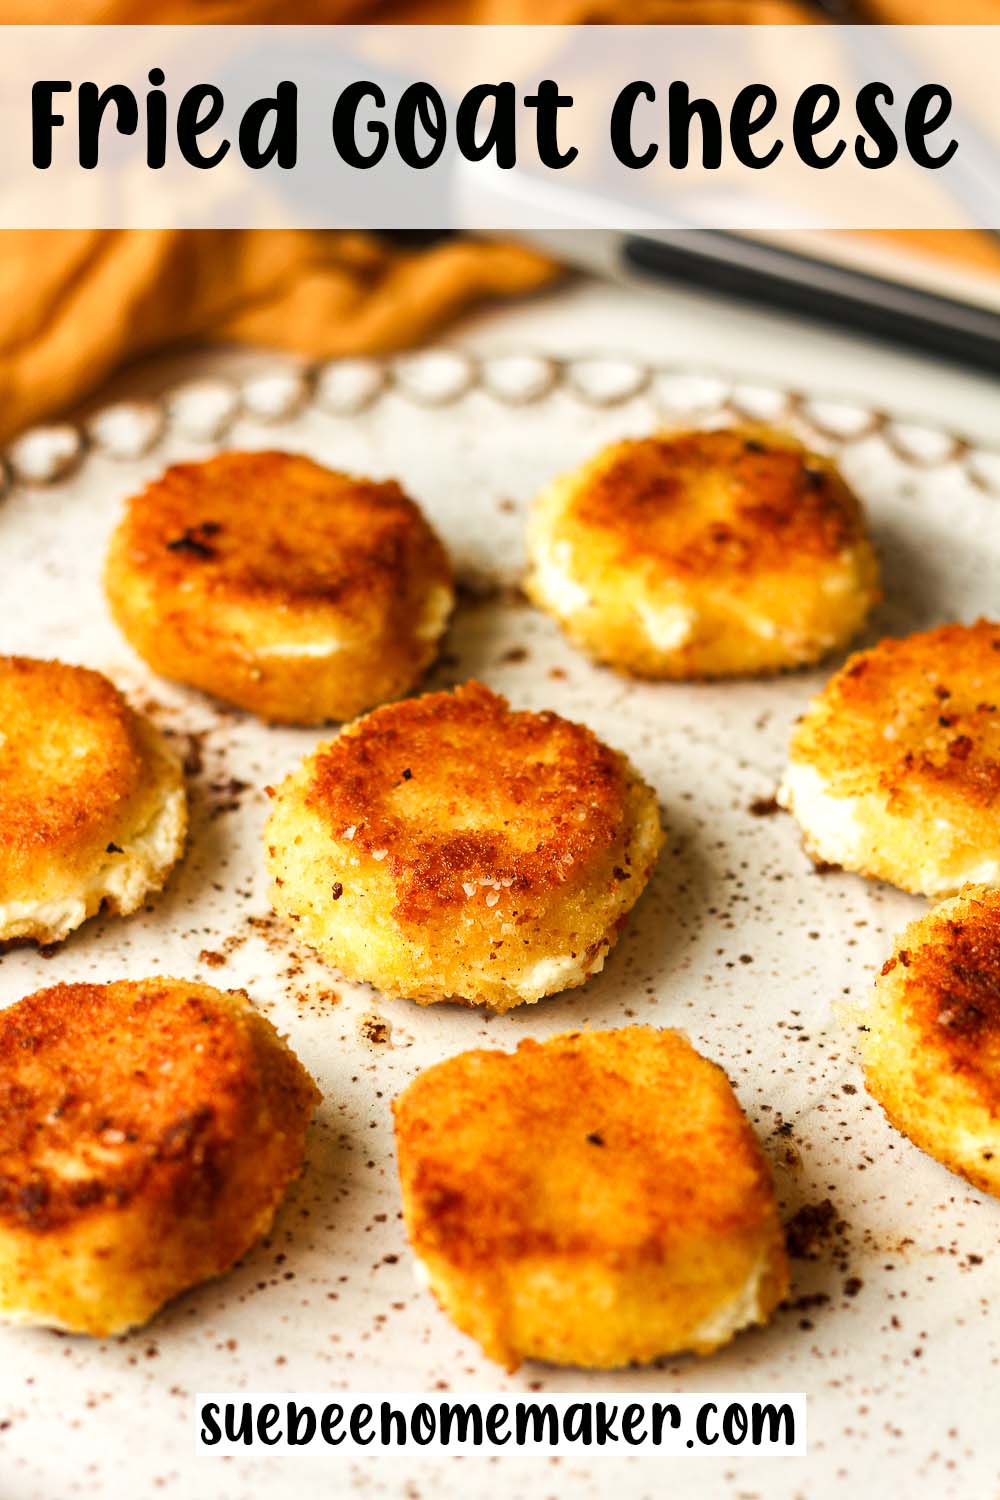 A plate of fried goat cheese rounds.